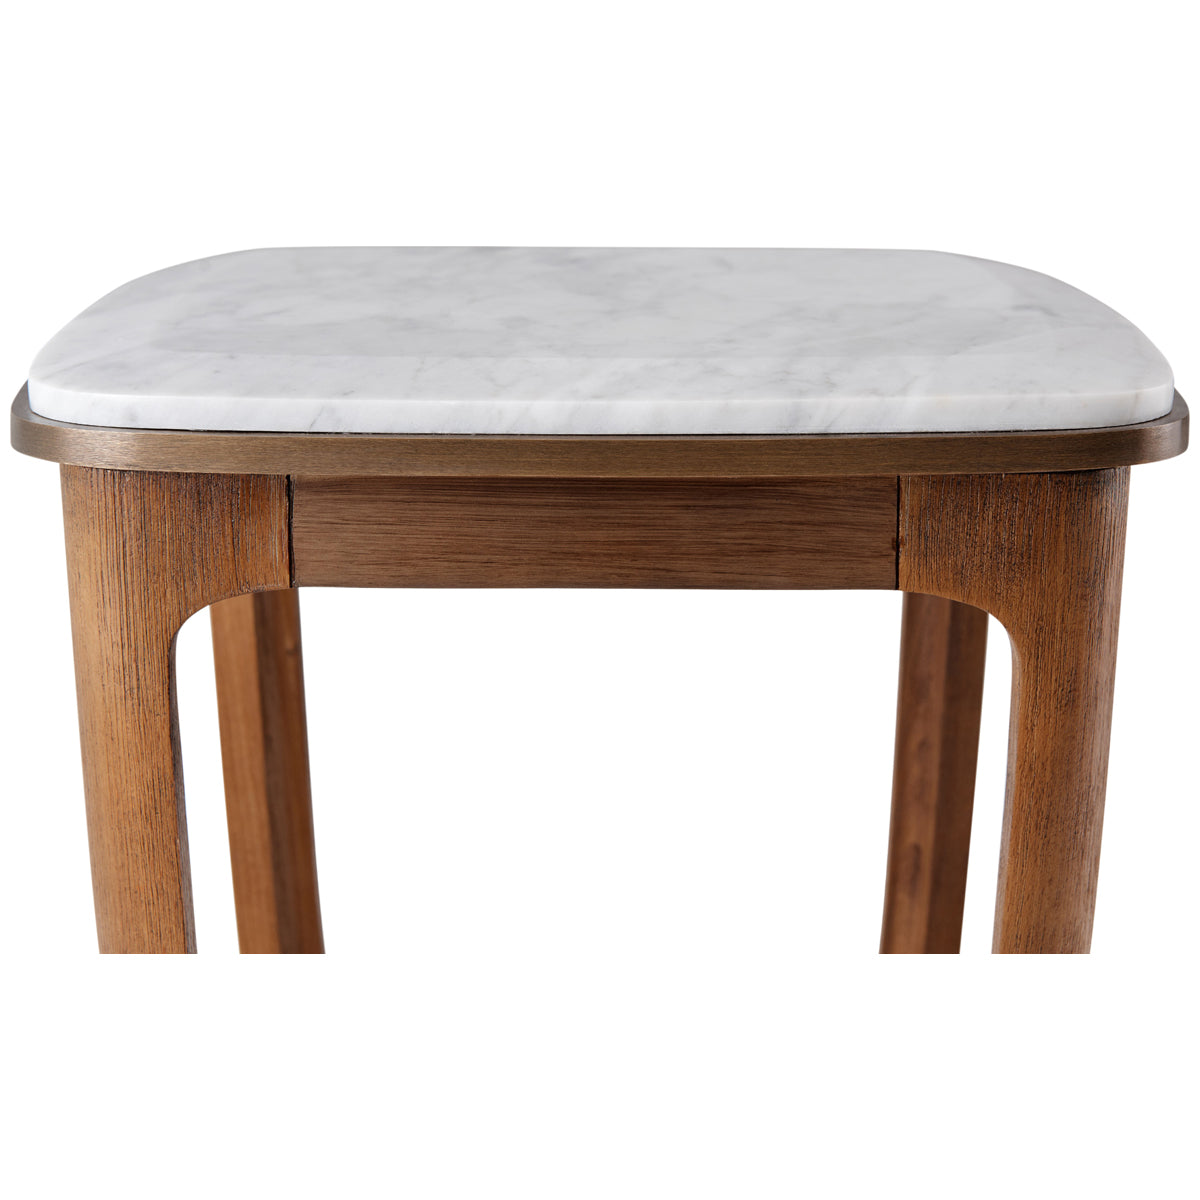 Theodore Alexander Converge Accent Table II